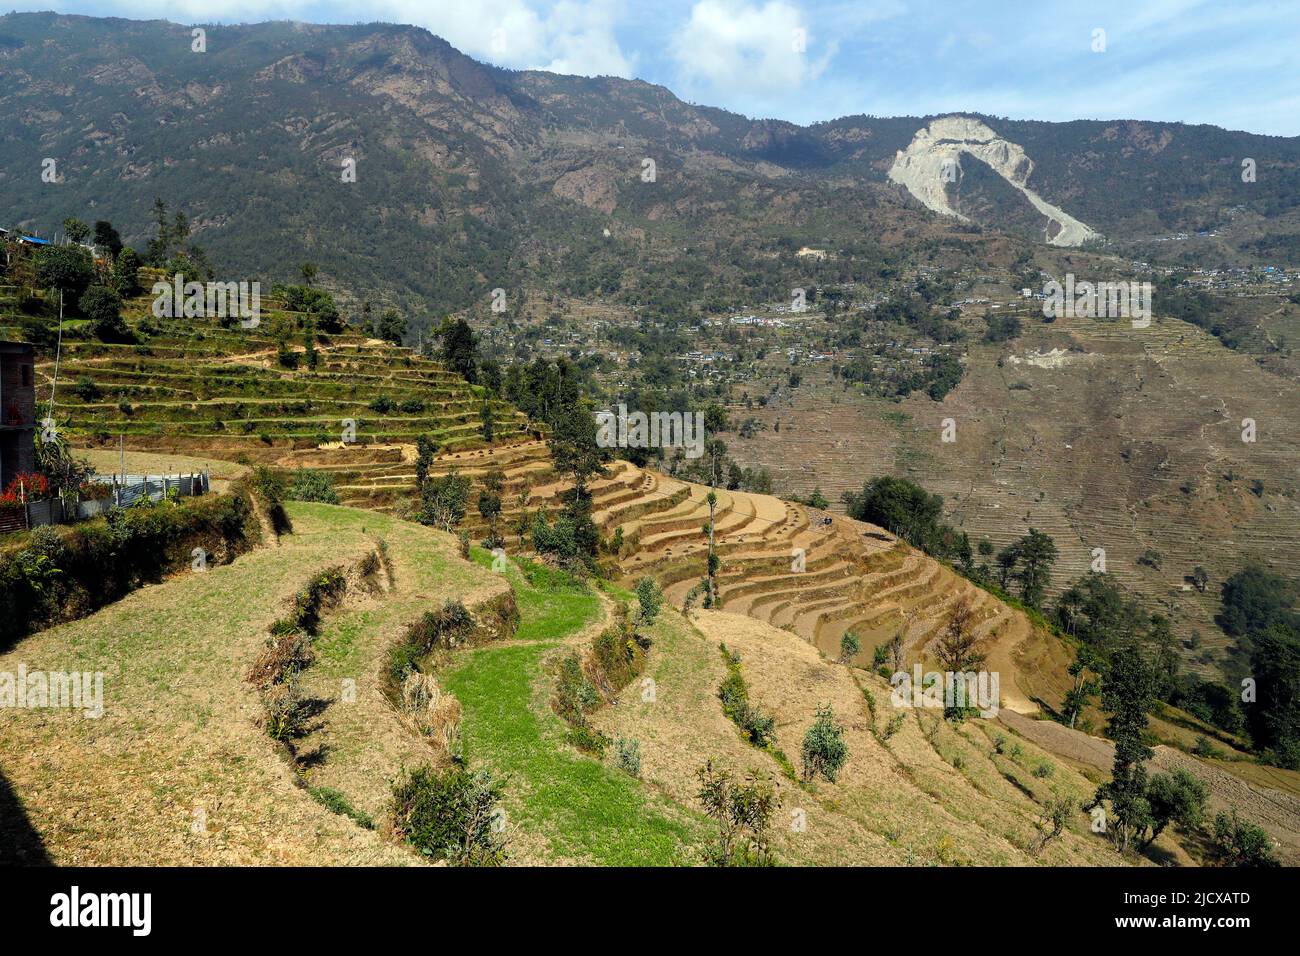 Mountainous village and traditional agriculture, Lapilang, Dolakha, Nepal, Asia Stock Photo